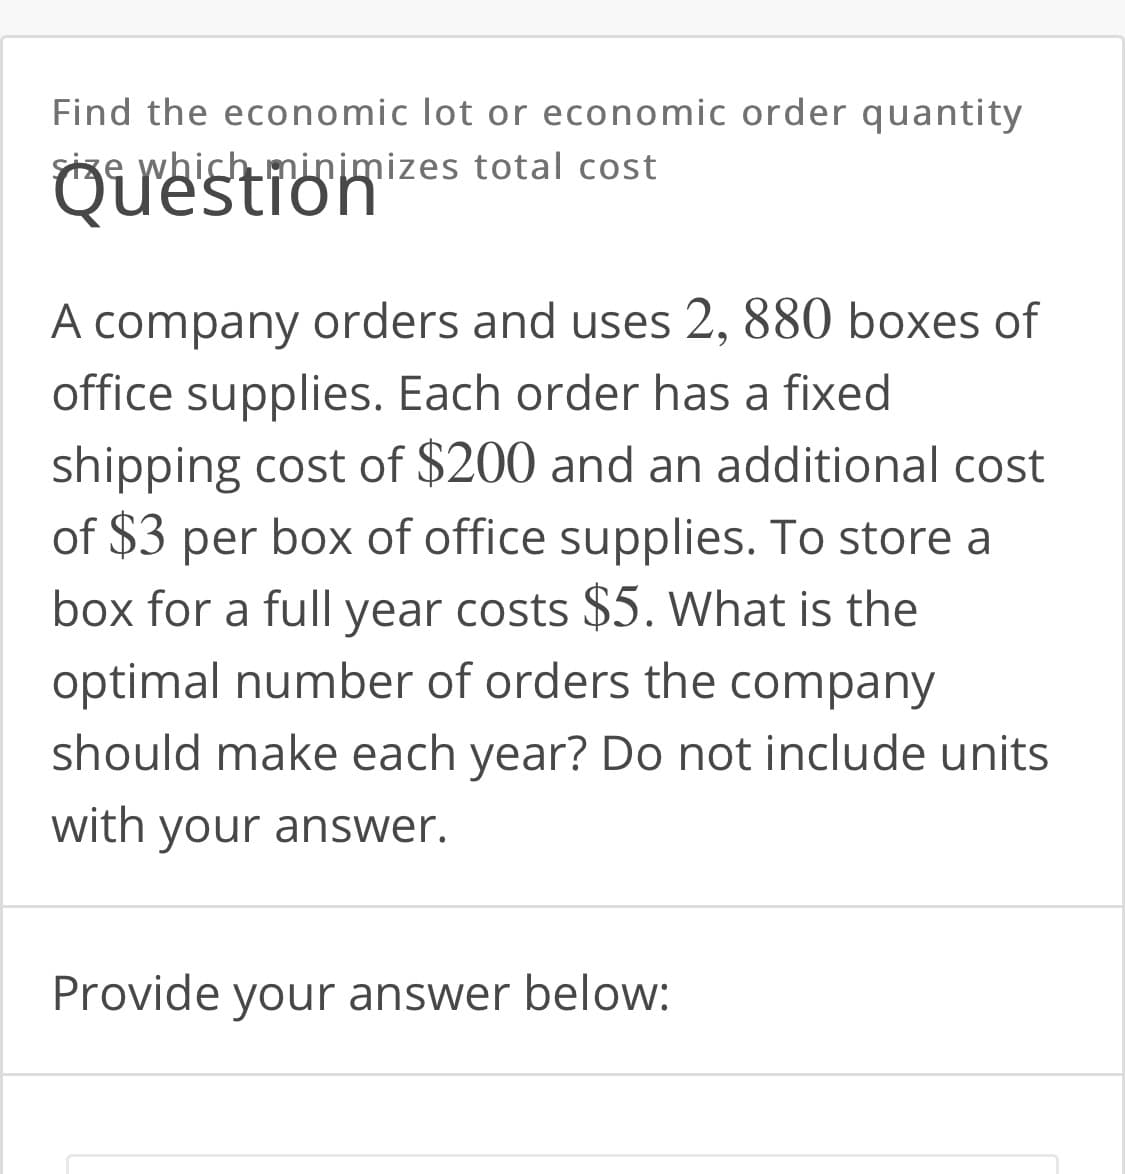 Find the economic lot or economic order quantity
size which minimizes total cost
Question
A company orders and uses 2, 880 boxes of
office supplies. Each order has a fixed
shipping cost of $200 and an additional cost
of $3 per box of office supplies. To store a
box for a full year costs $5. What is the
optimal number of orders the company
should make each year? Do not include units
with your answer.
Provide your answer below:
